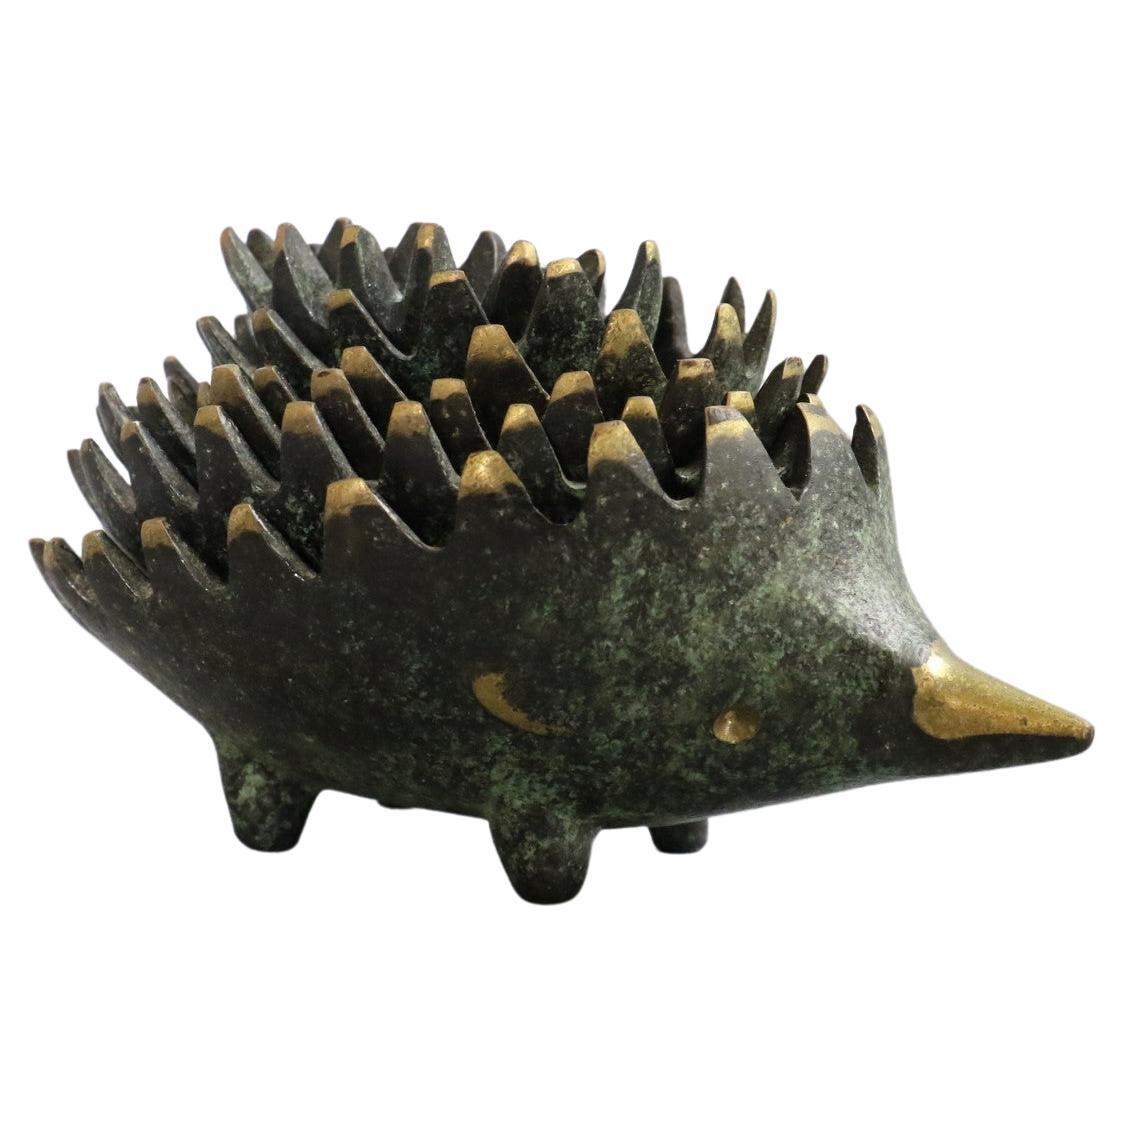 Walter Bosse Set of 6 hedgehog sculptures for Hertha Baller, circa 1950s

Midcentury Walter Bosse hedgehog stackable ashtray made in Austria. This vintage ashtray includes all six trays.